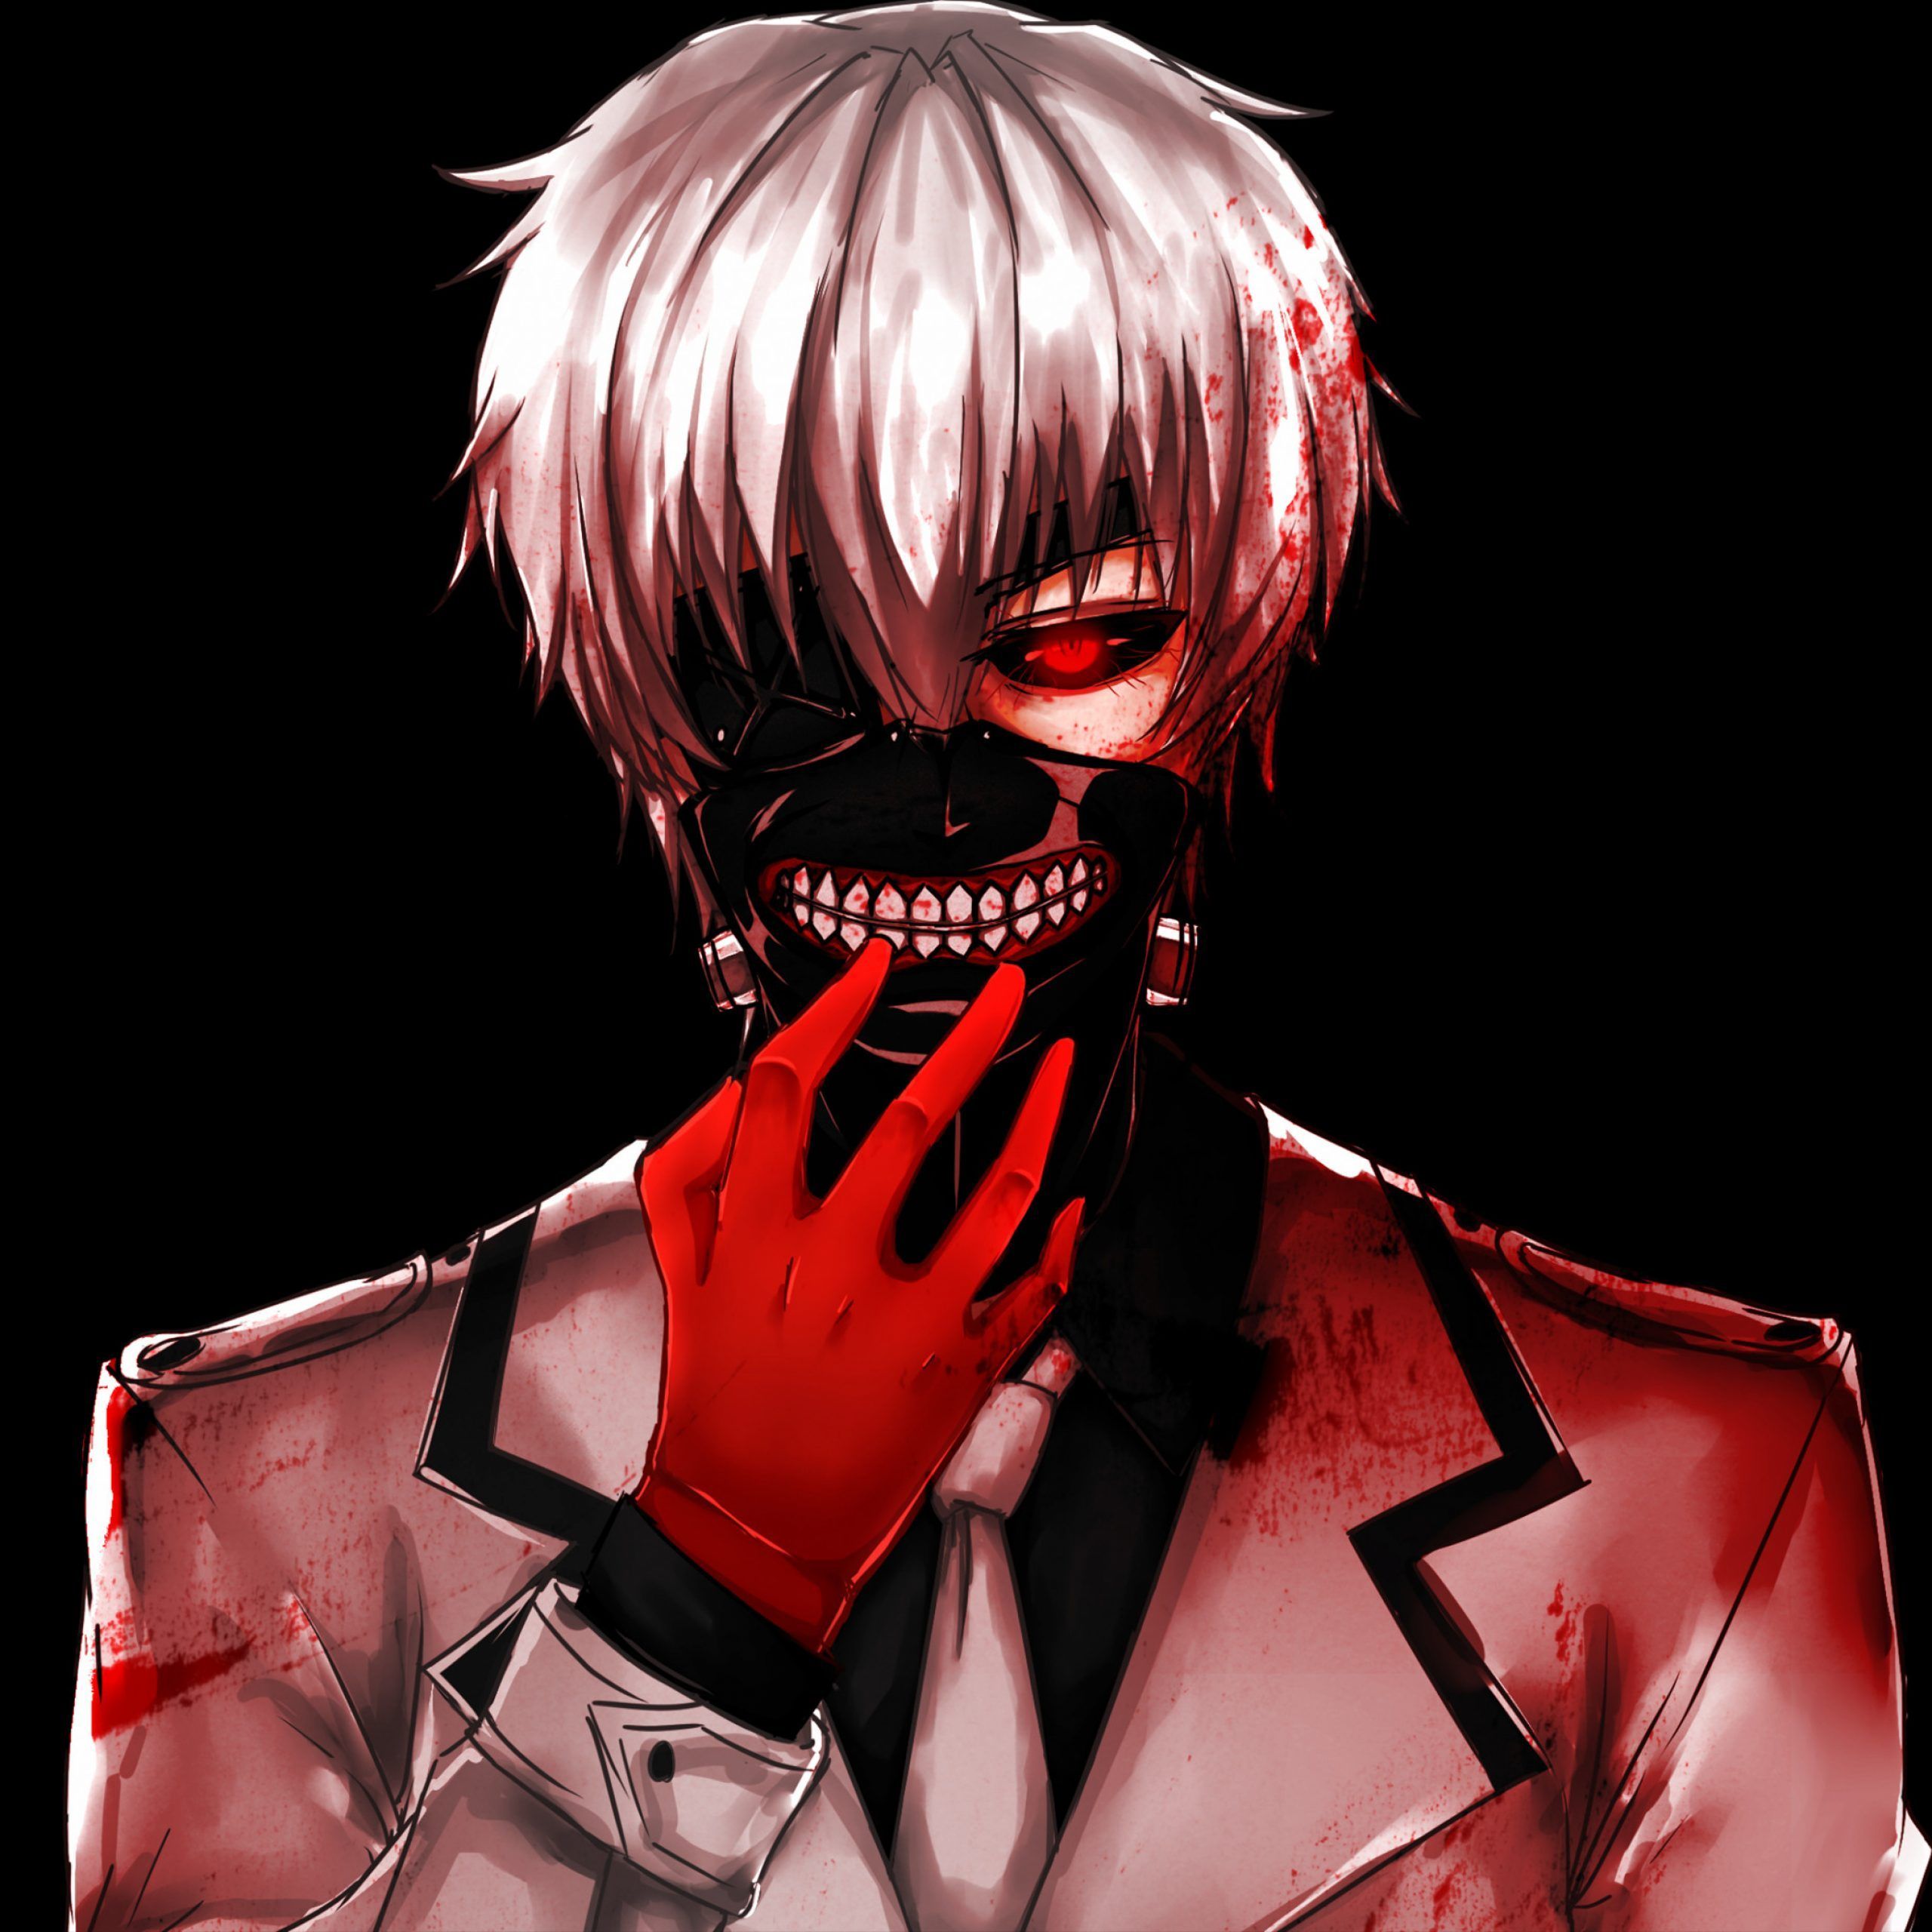 Tokyo Ghoul Re 18k, HD Anime, 18k Wallpapers, Image, Backgrounds